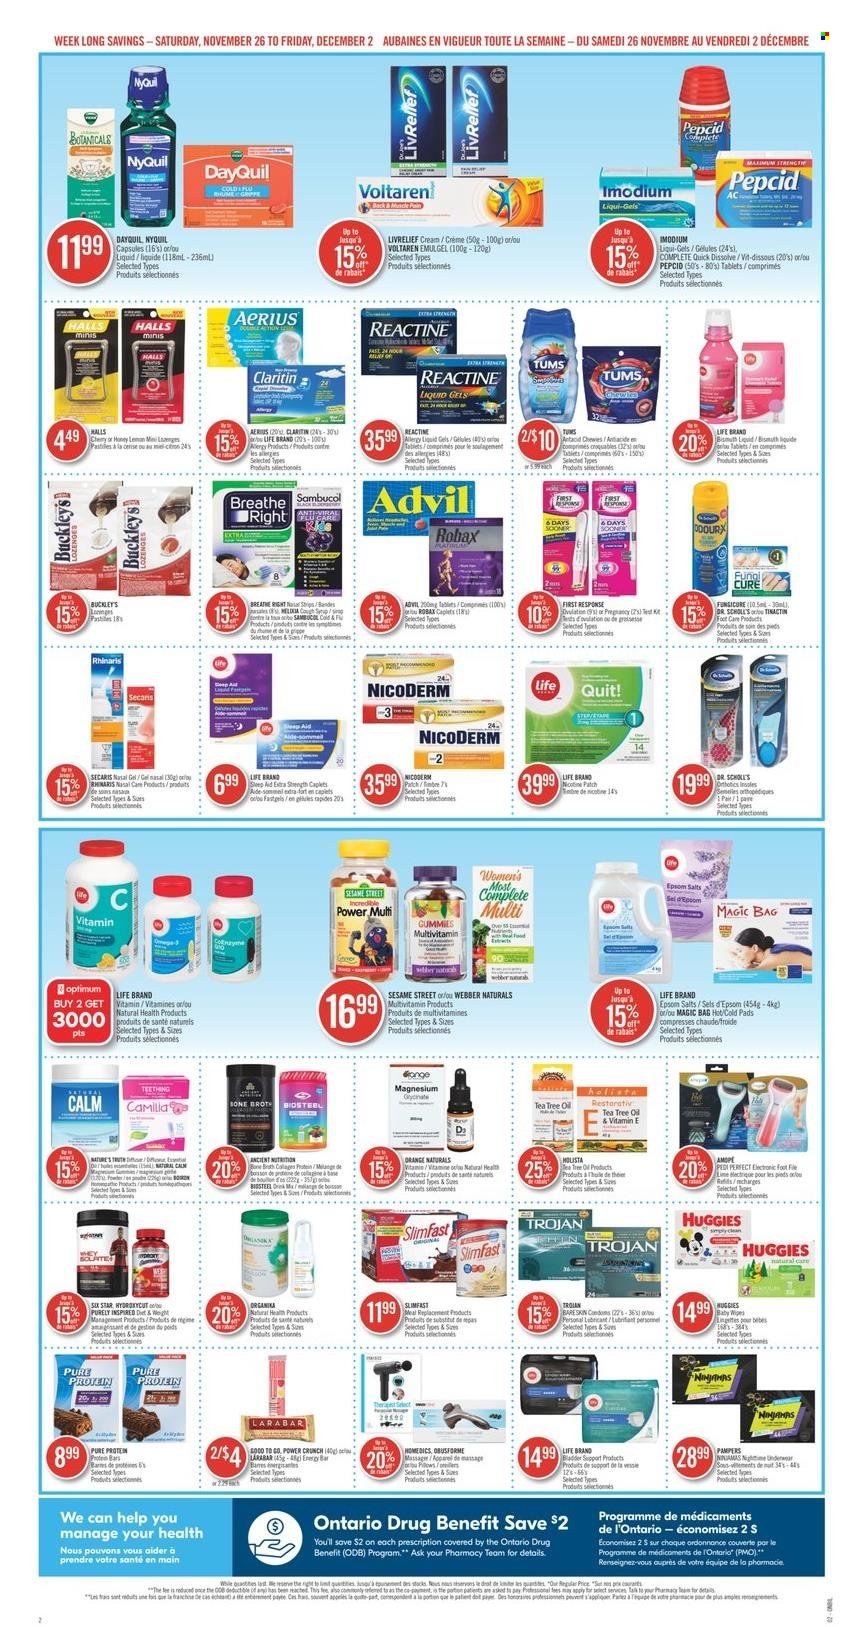 Shoppers Drug Mart Flyer - November 26, 2022 - December 02, 2022 - Sales products - Slimfast, Halls, pastilles, Sesame Street, oil, tea, wipes, baby wipes, lubricant, bag, foot care, Optimum, DayQuil, Magnesium, multivitamin, NicoDerm, Pepcid, NyQuil, Advil Rapid, Antacid, tea tree oil, Sambucol, Dr. Scholl's, Huggies, Imodium, Pampers. Page 3.